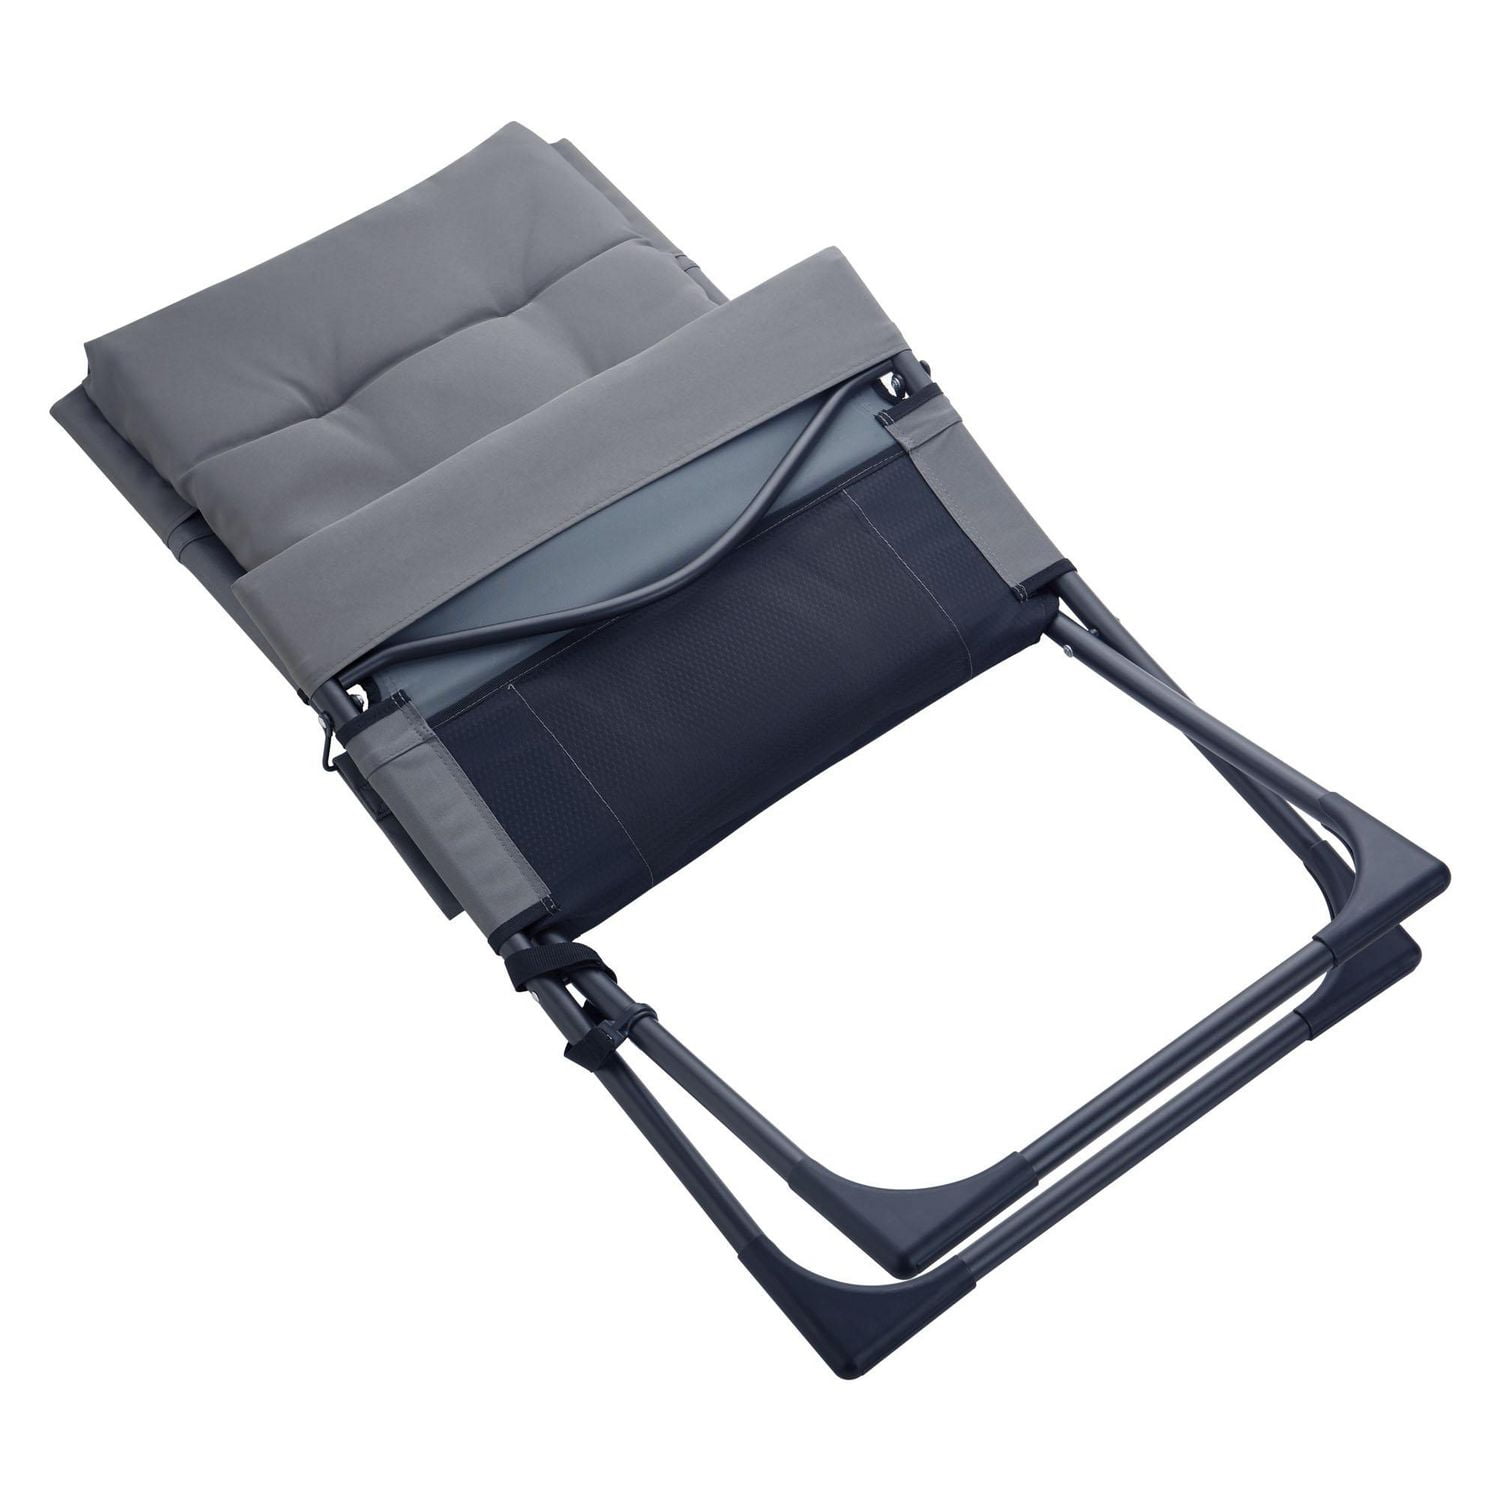 Mainstays 2-in-1 Folding Patio Chair 